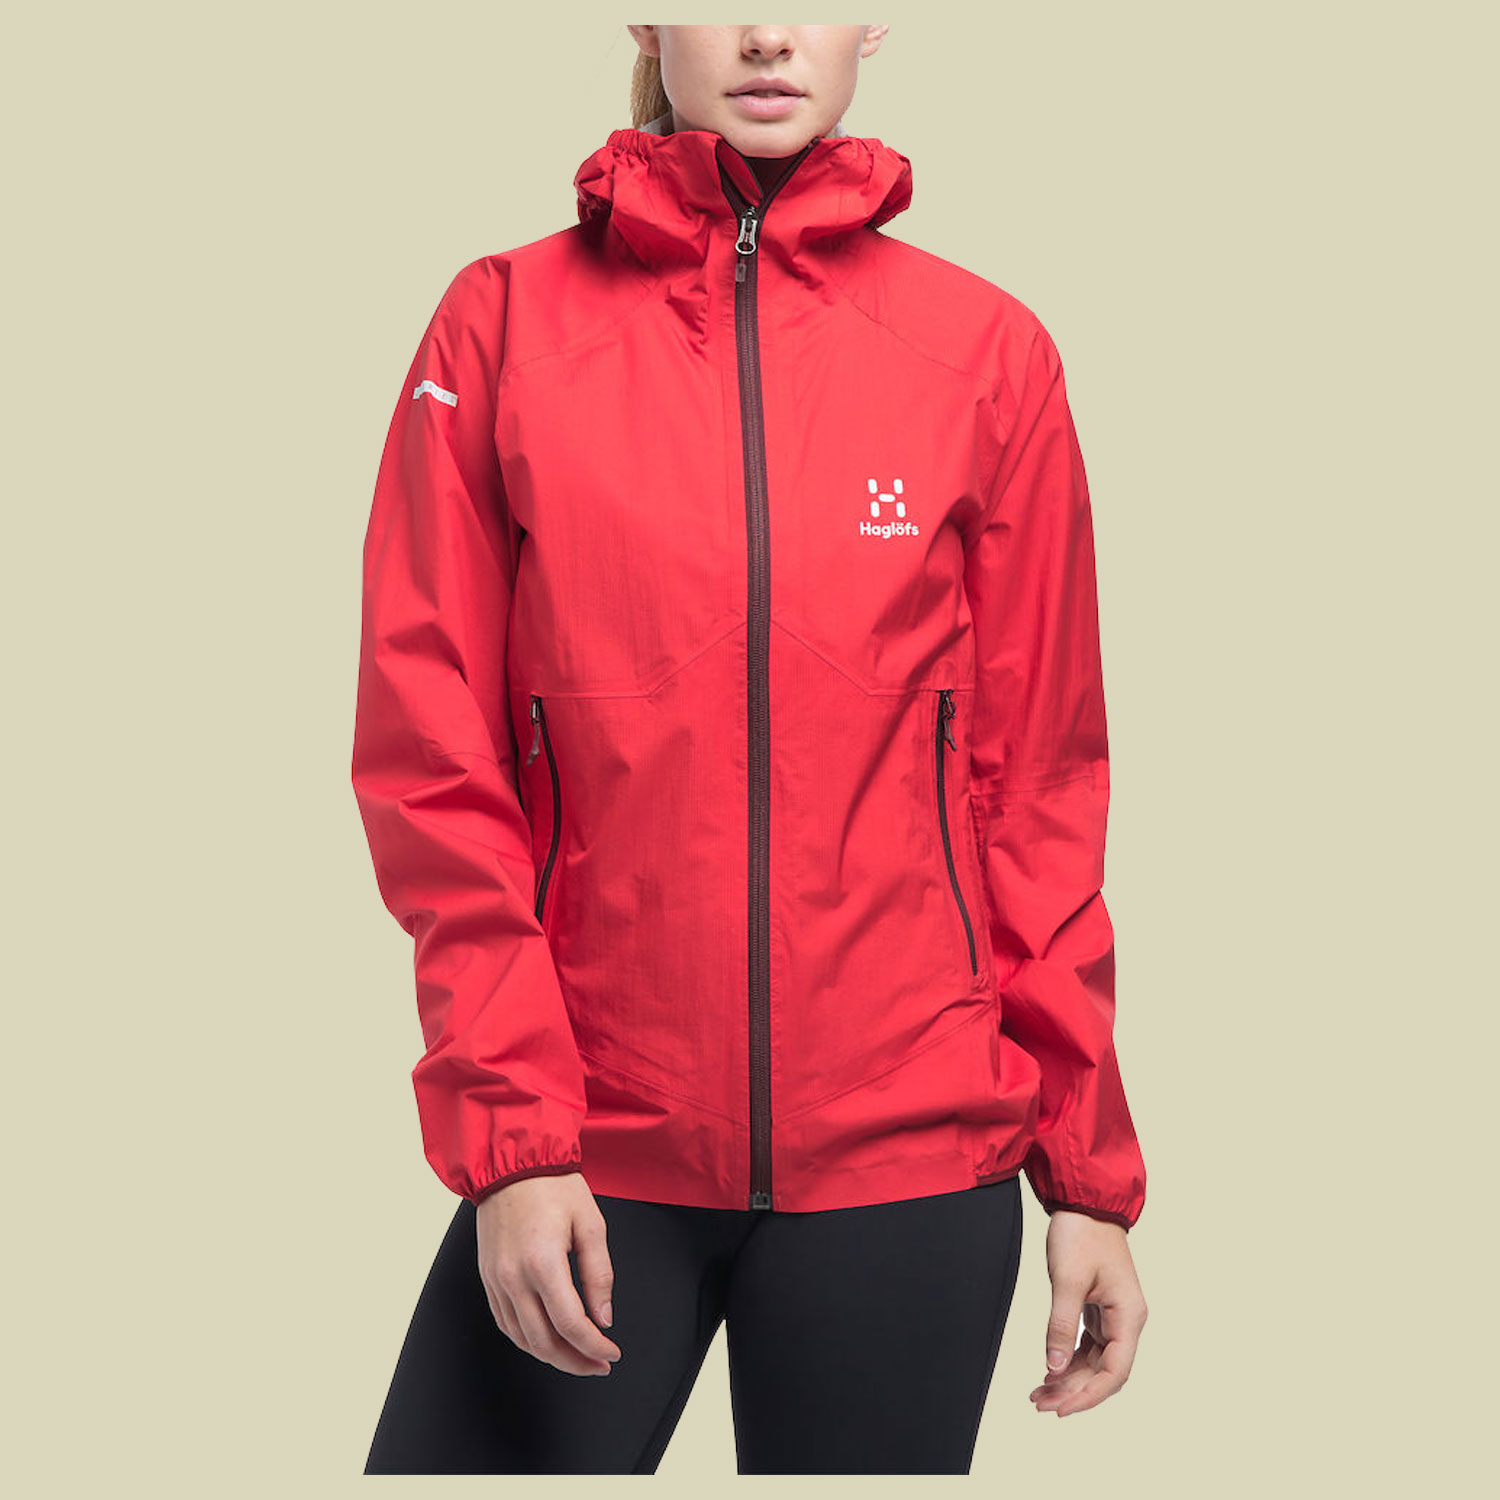 L.I.M Proof Multi Jacket Women Größe S Farbe hibiscus red